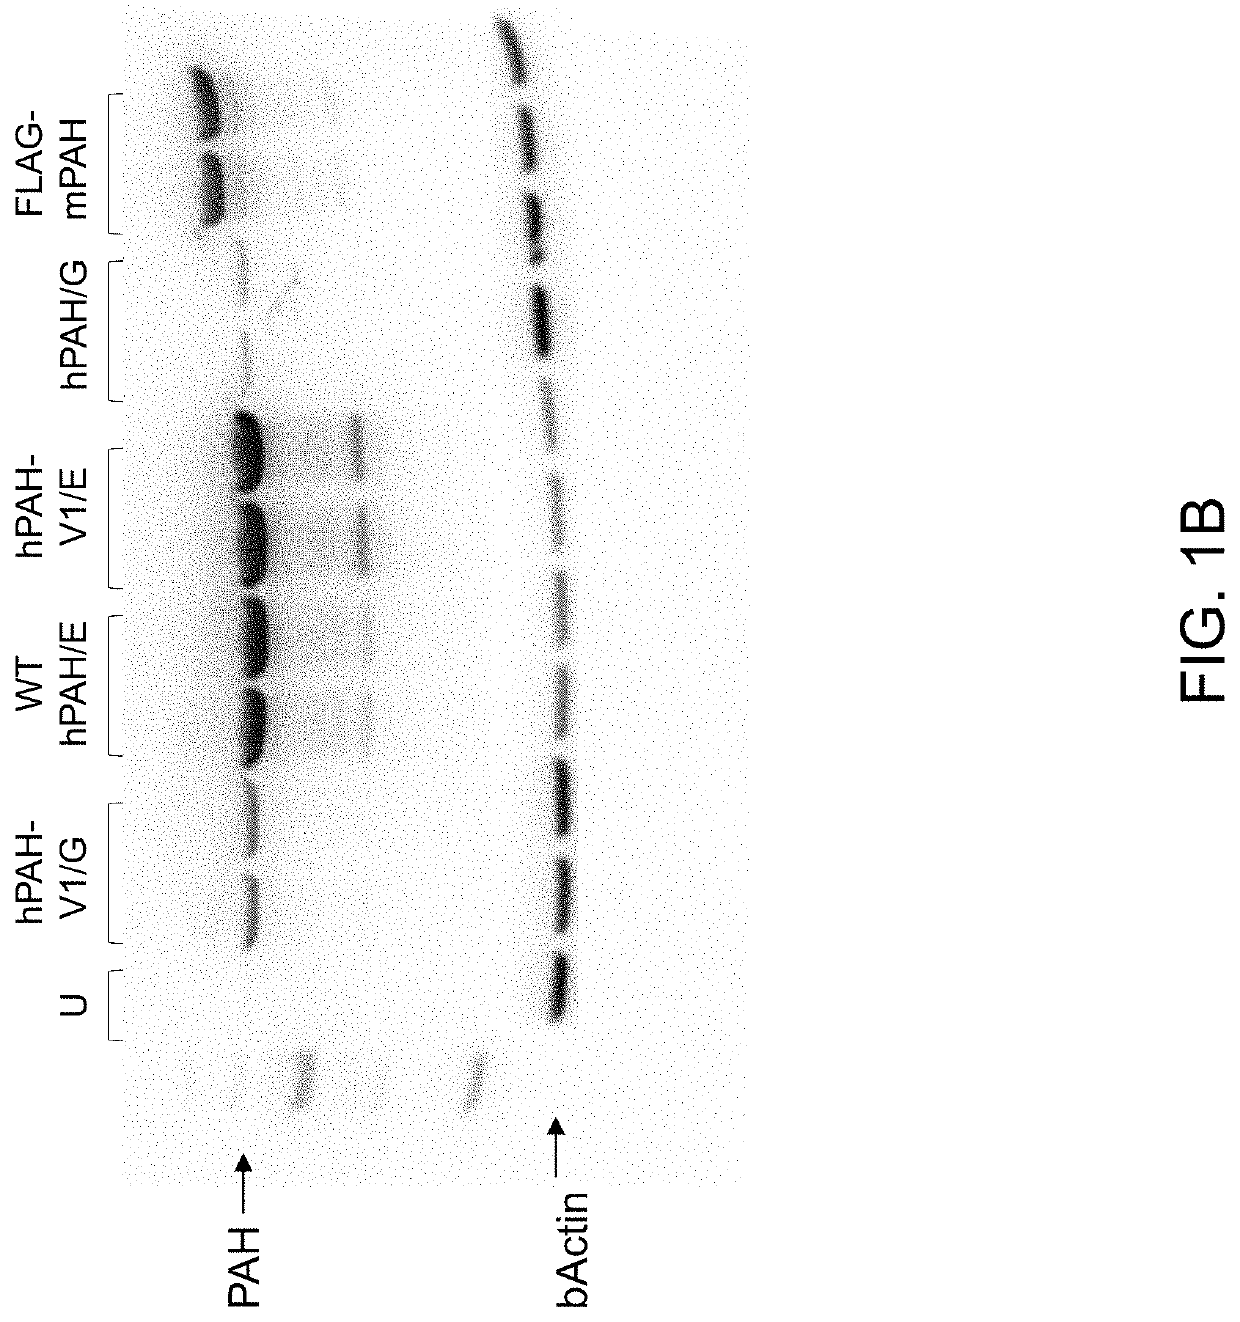 Human pah expression cassette for treatment of pku by liver-directed gene replacement therapy